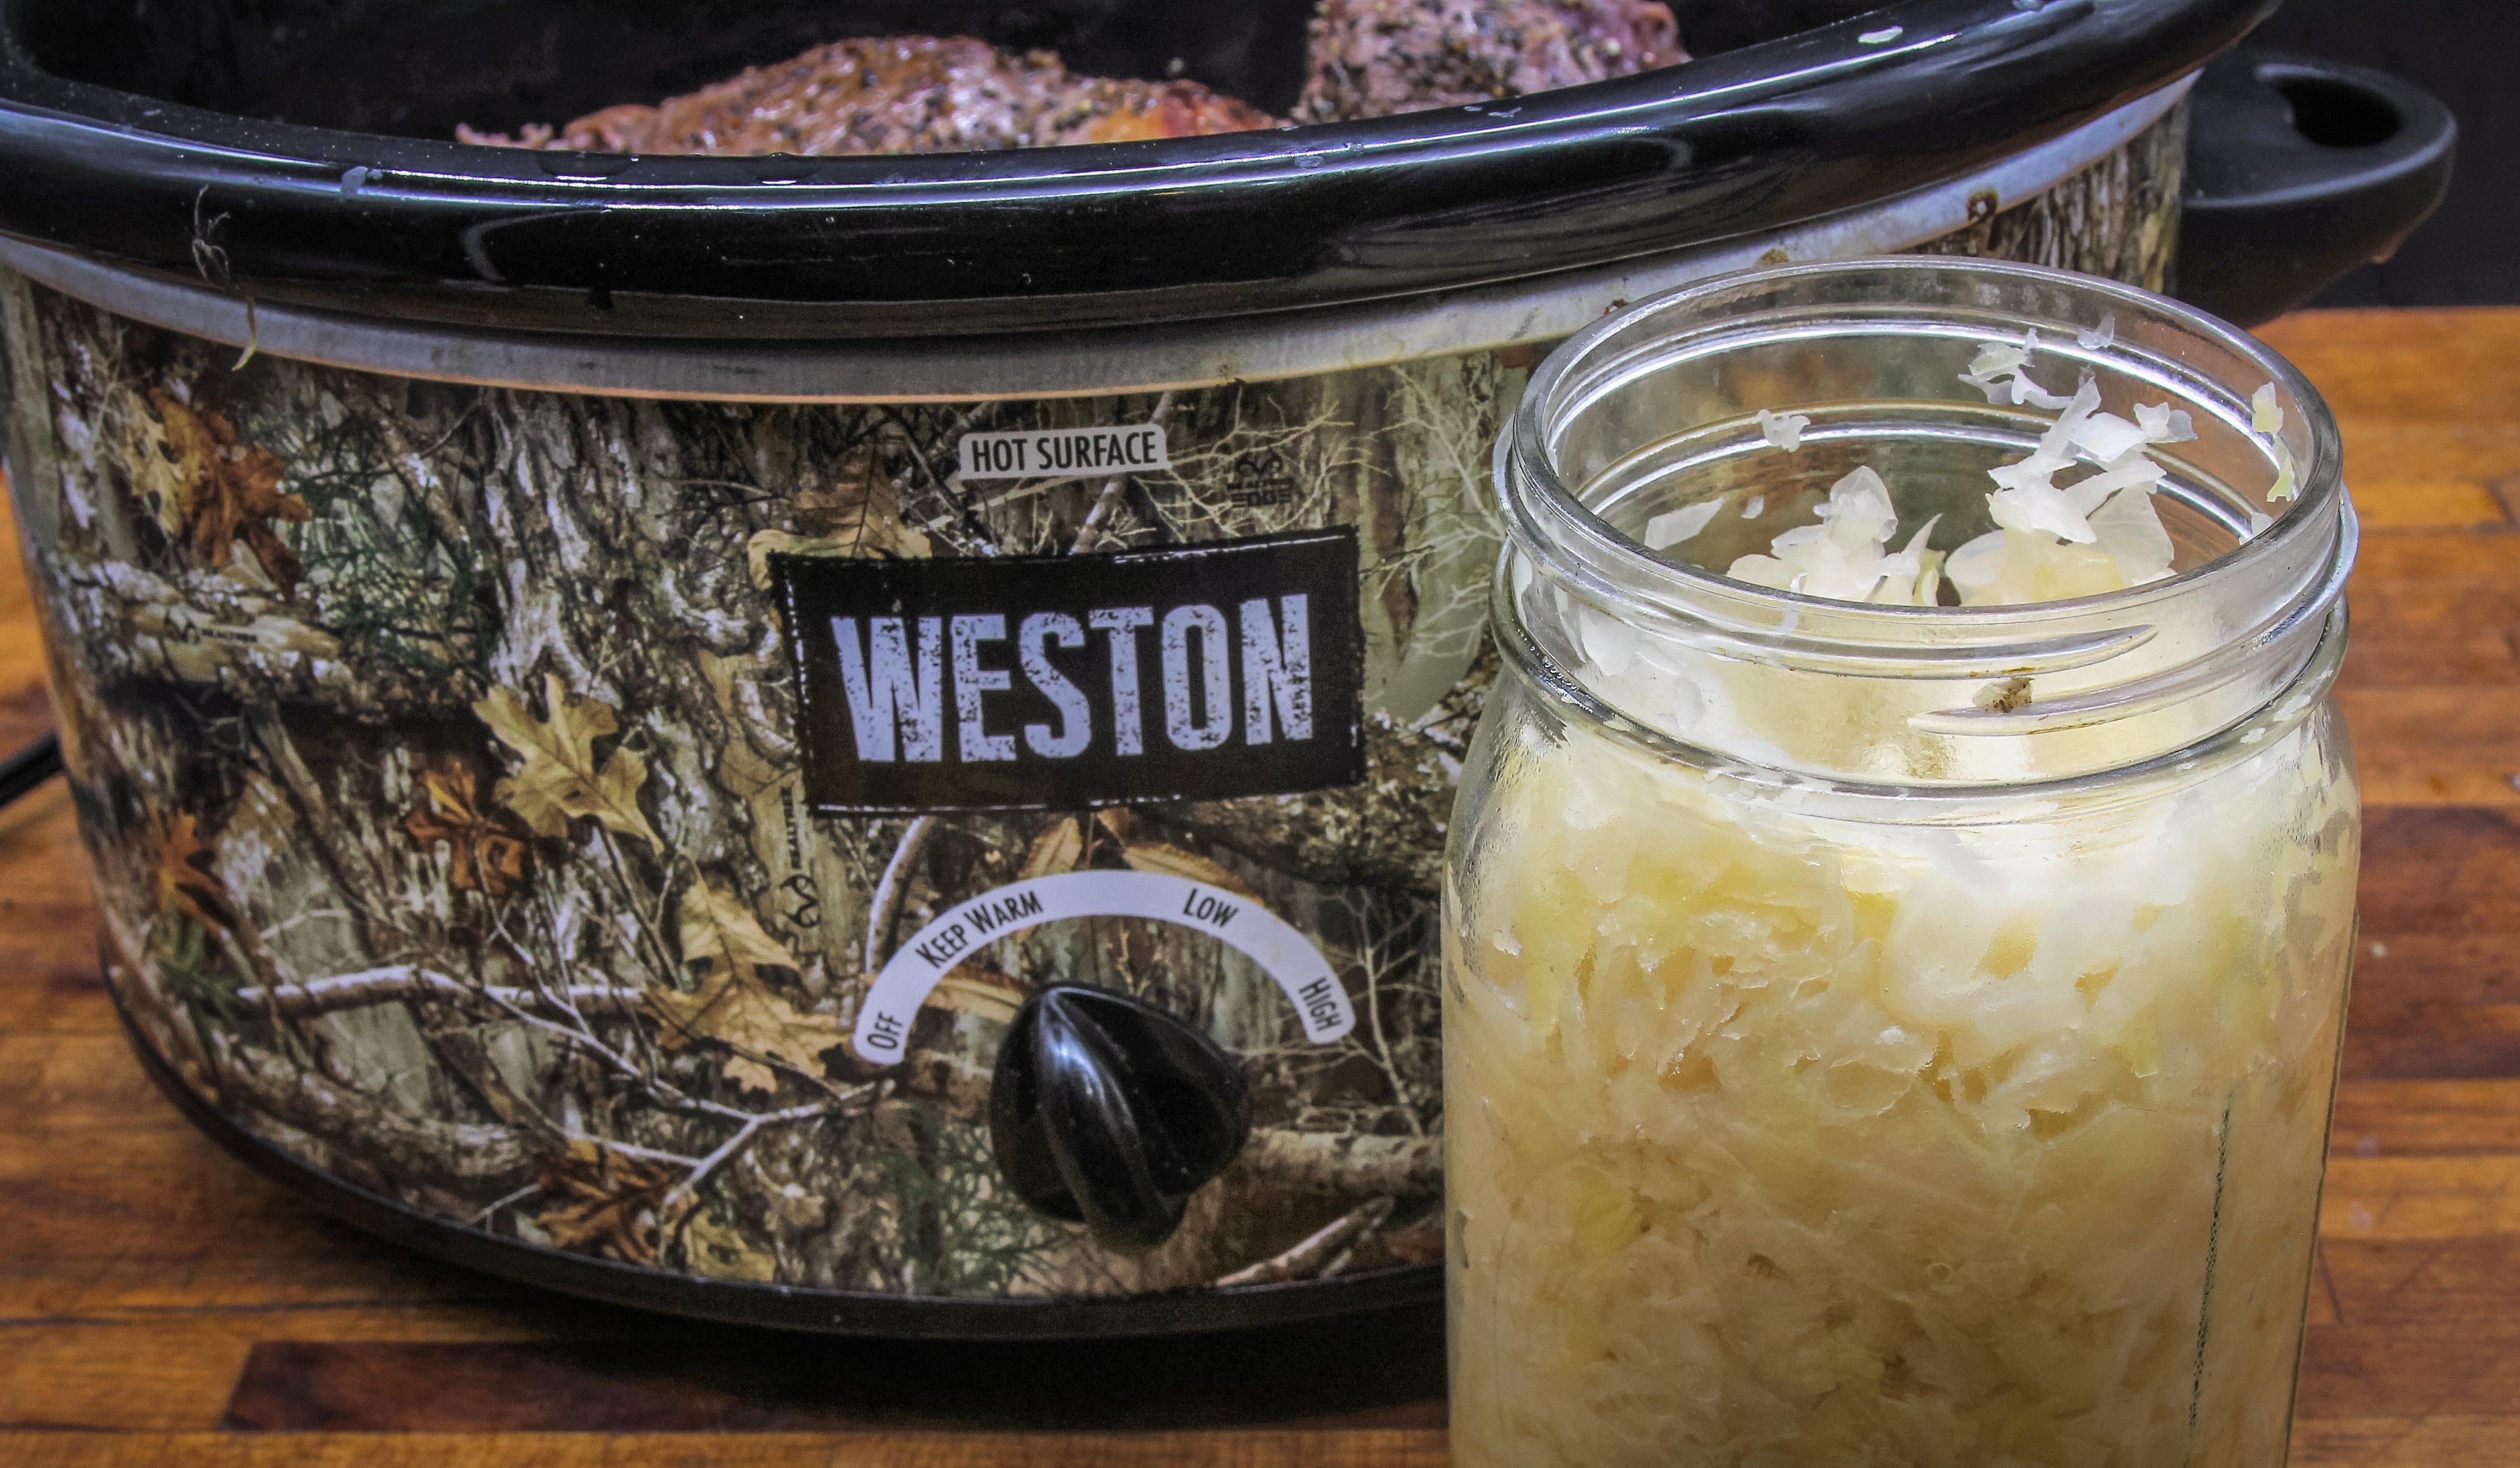 Use homemade sauerkraut or your favorite commercially produced variety.